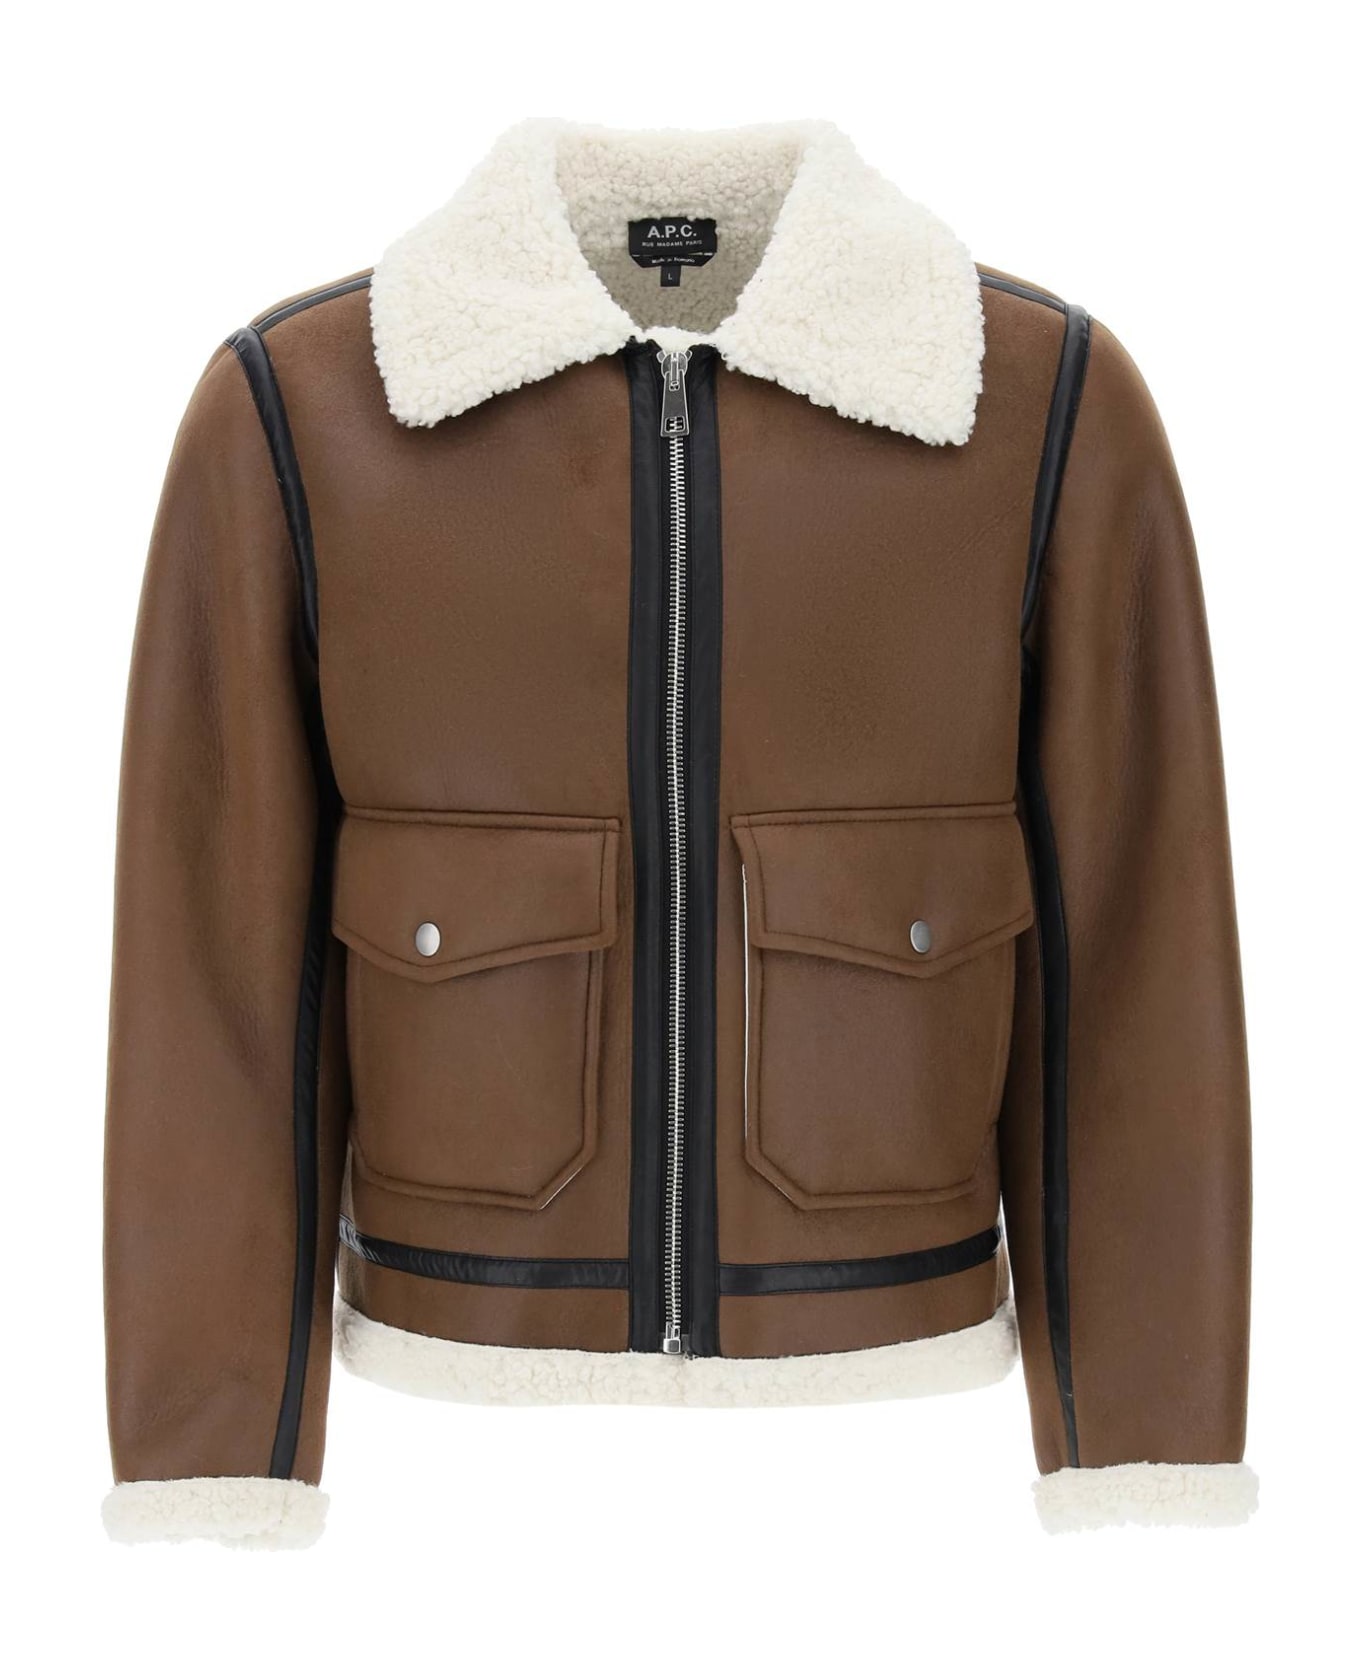 A.P.C. Eco-shearling Jacket - BROWN